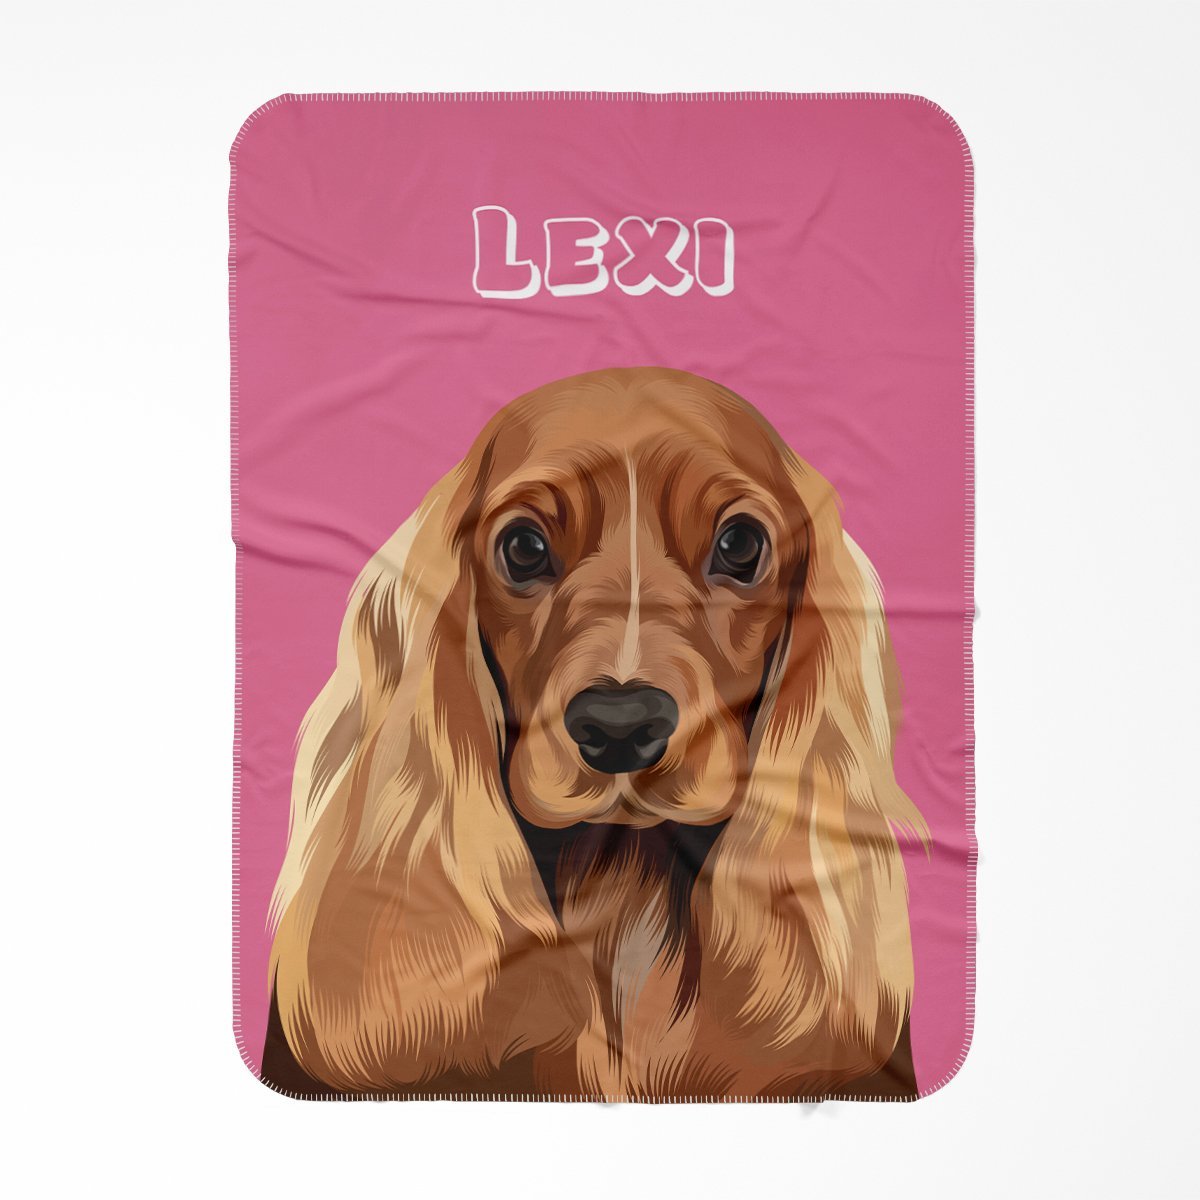 Modern: Custom One Pet Blanket (Hal Body) - Paw & Glory - #pet portraits# - #dog portraits# - #pet portraits uk#Pawandglory, Pet art blanket,blanket with dogs on, microfiber dog blanket, put your pet on a blanket, best blankets for puppies, pet collage blanket